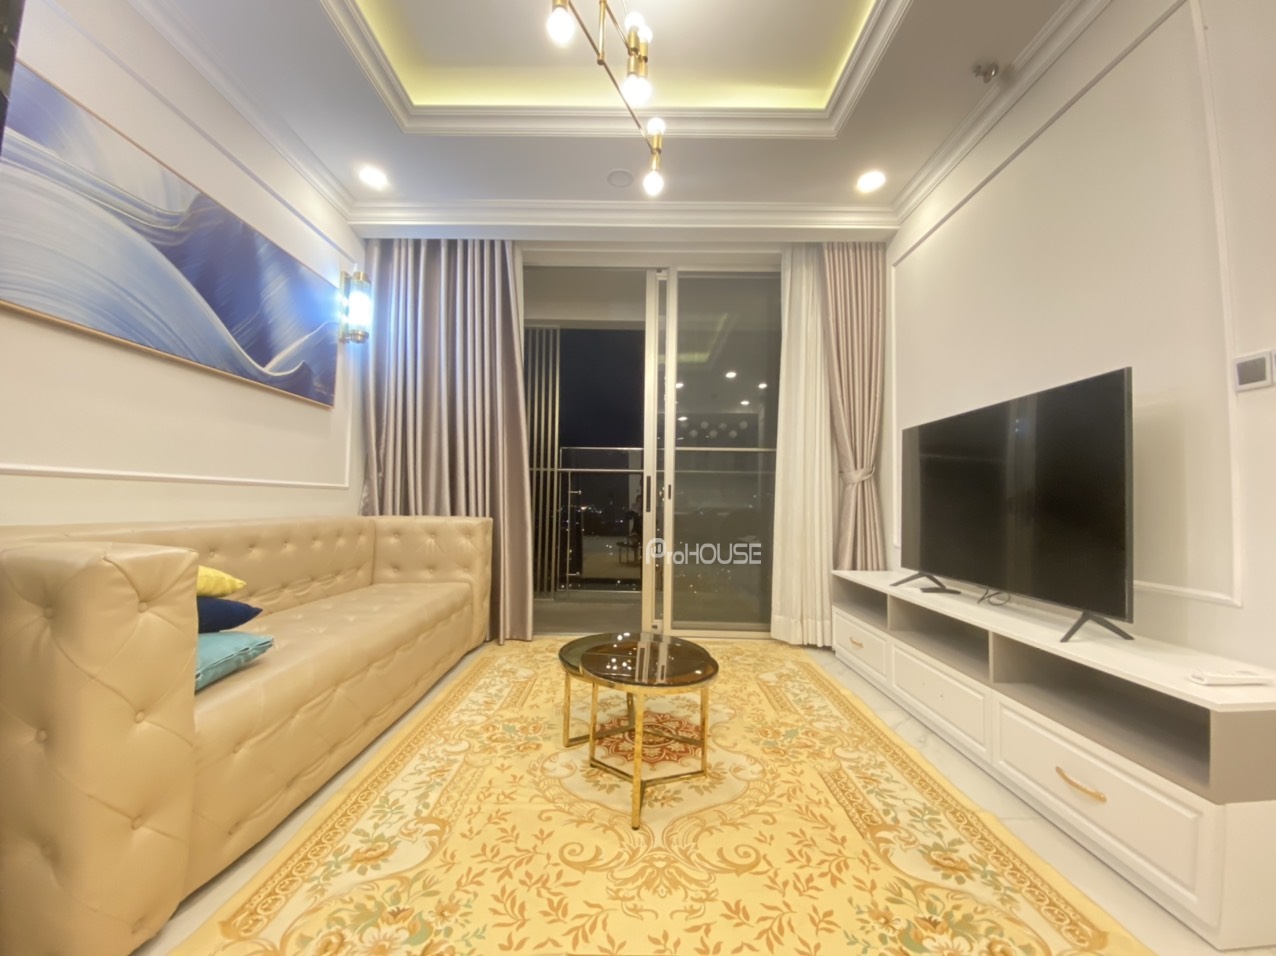 2 bedroom apartment for rent with city view in Midtown Phu My Hung with full furniture